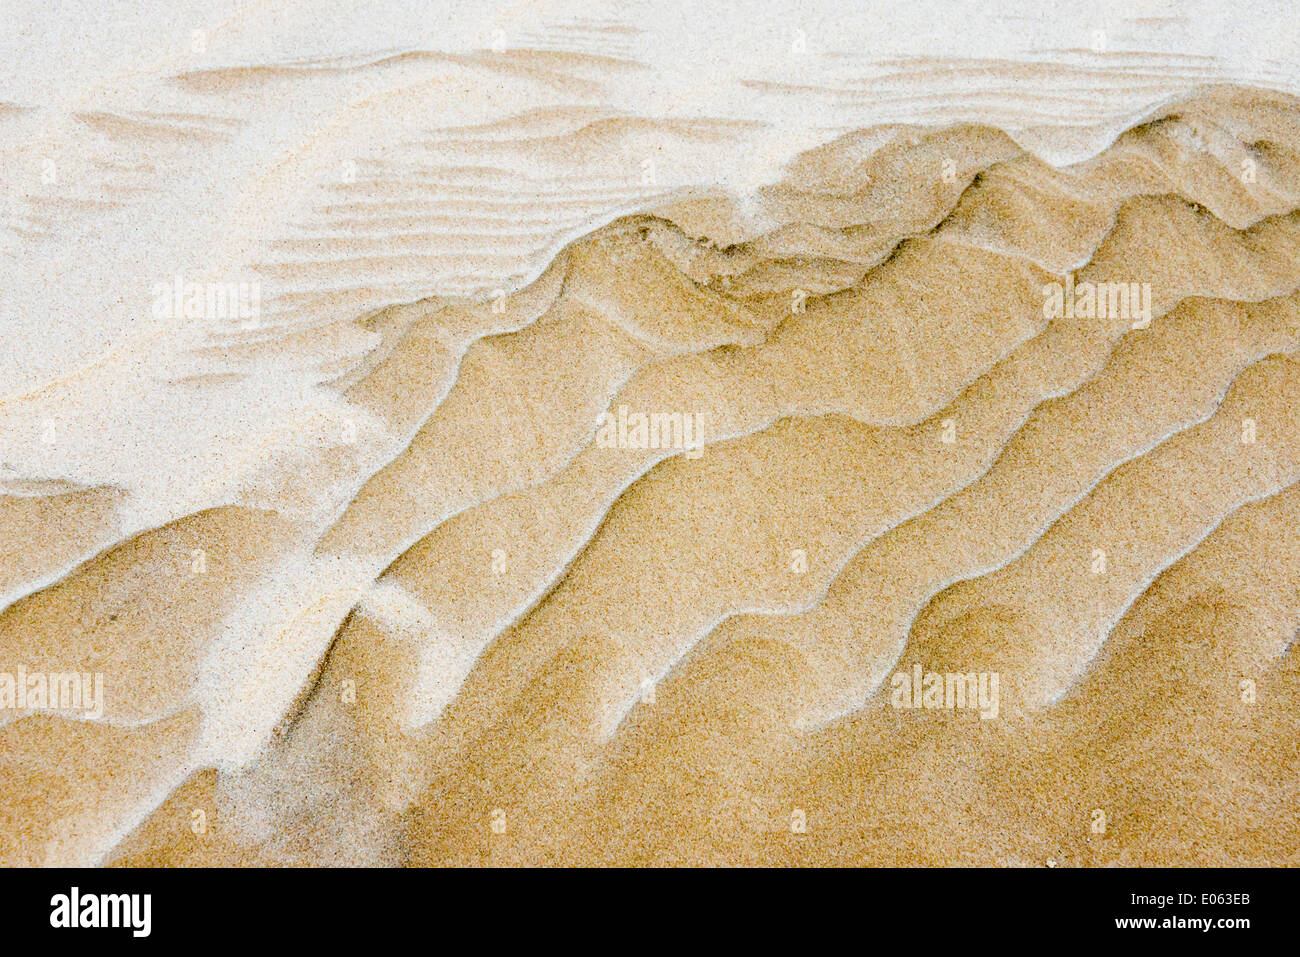 Pattern washed out by rain on sand dune resembling painting, Lencois Maranheinses National Park, Maranhao State, Brazil Stock Photo